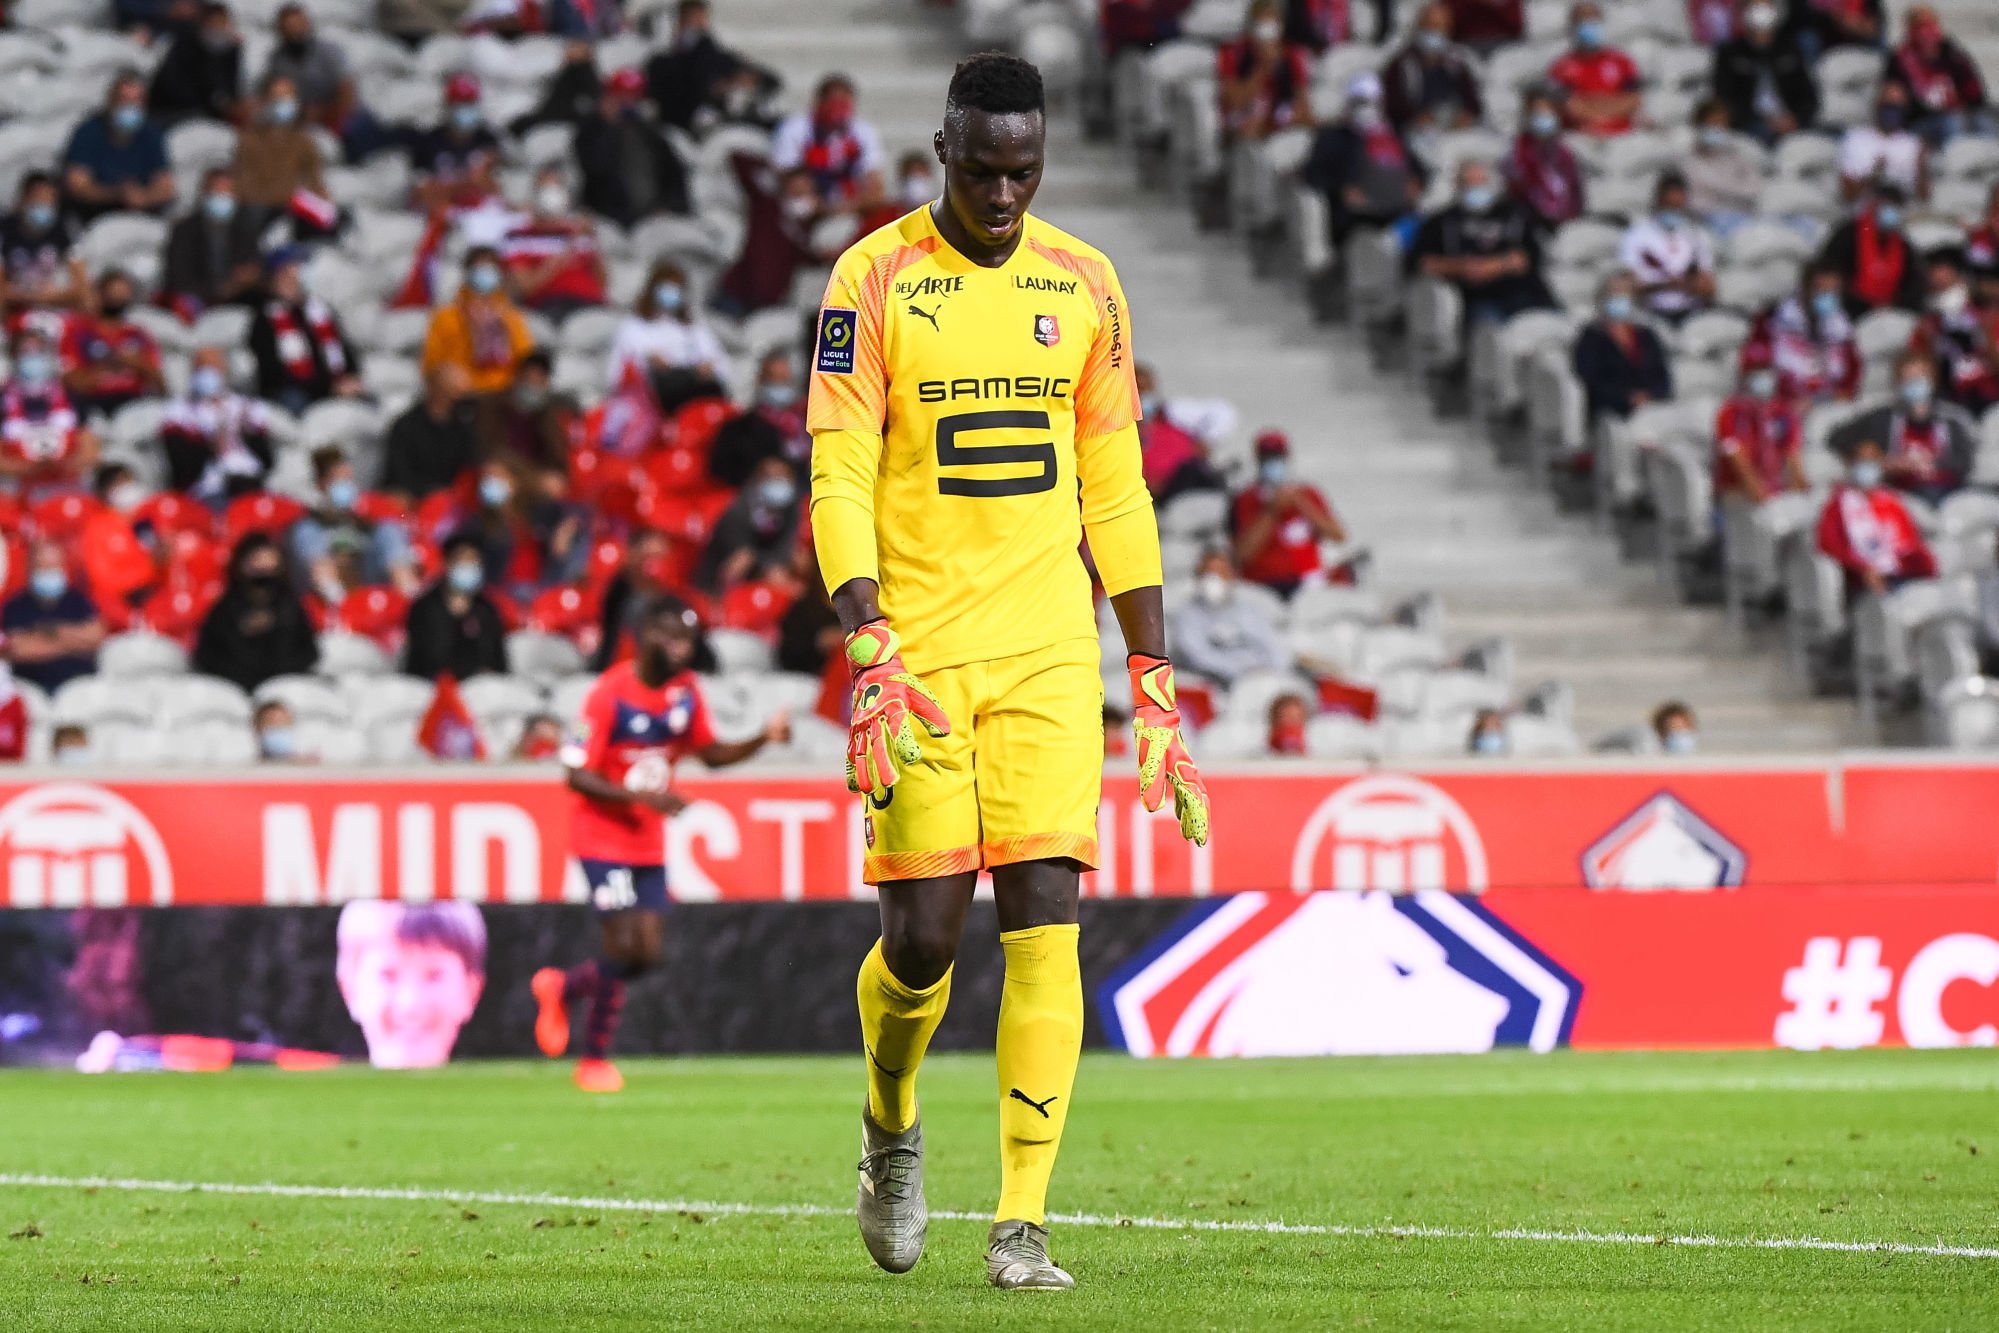 Edouard MENDY of Rennes looks dejected during the French Ligue 1 soccer match between Lille and Rennes on August 22, 2020 in Lille, France. (Photo by Baptiste Fernandez/Icon Sport) - Edouard MENDY - Stade Pierre Mauroy - Lille (France)